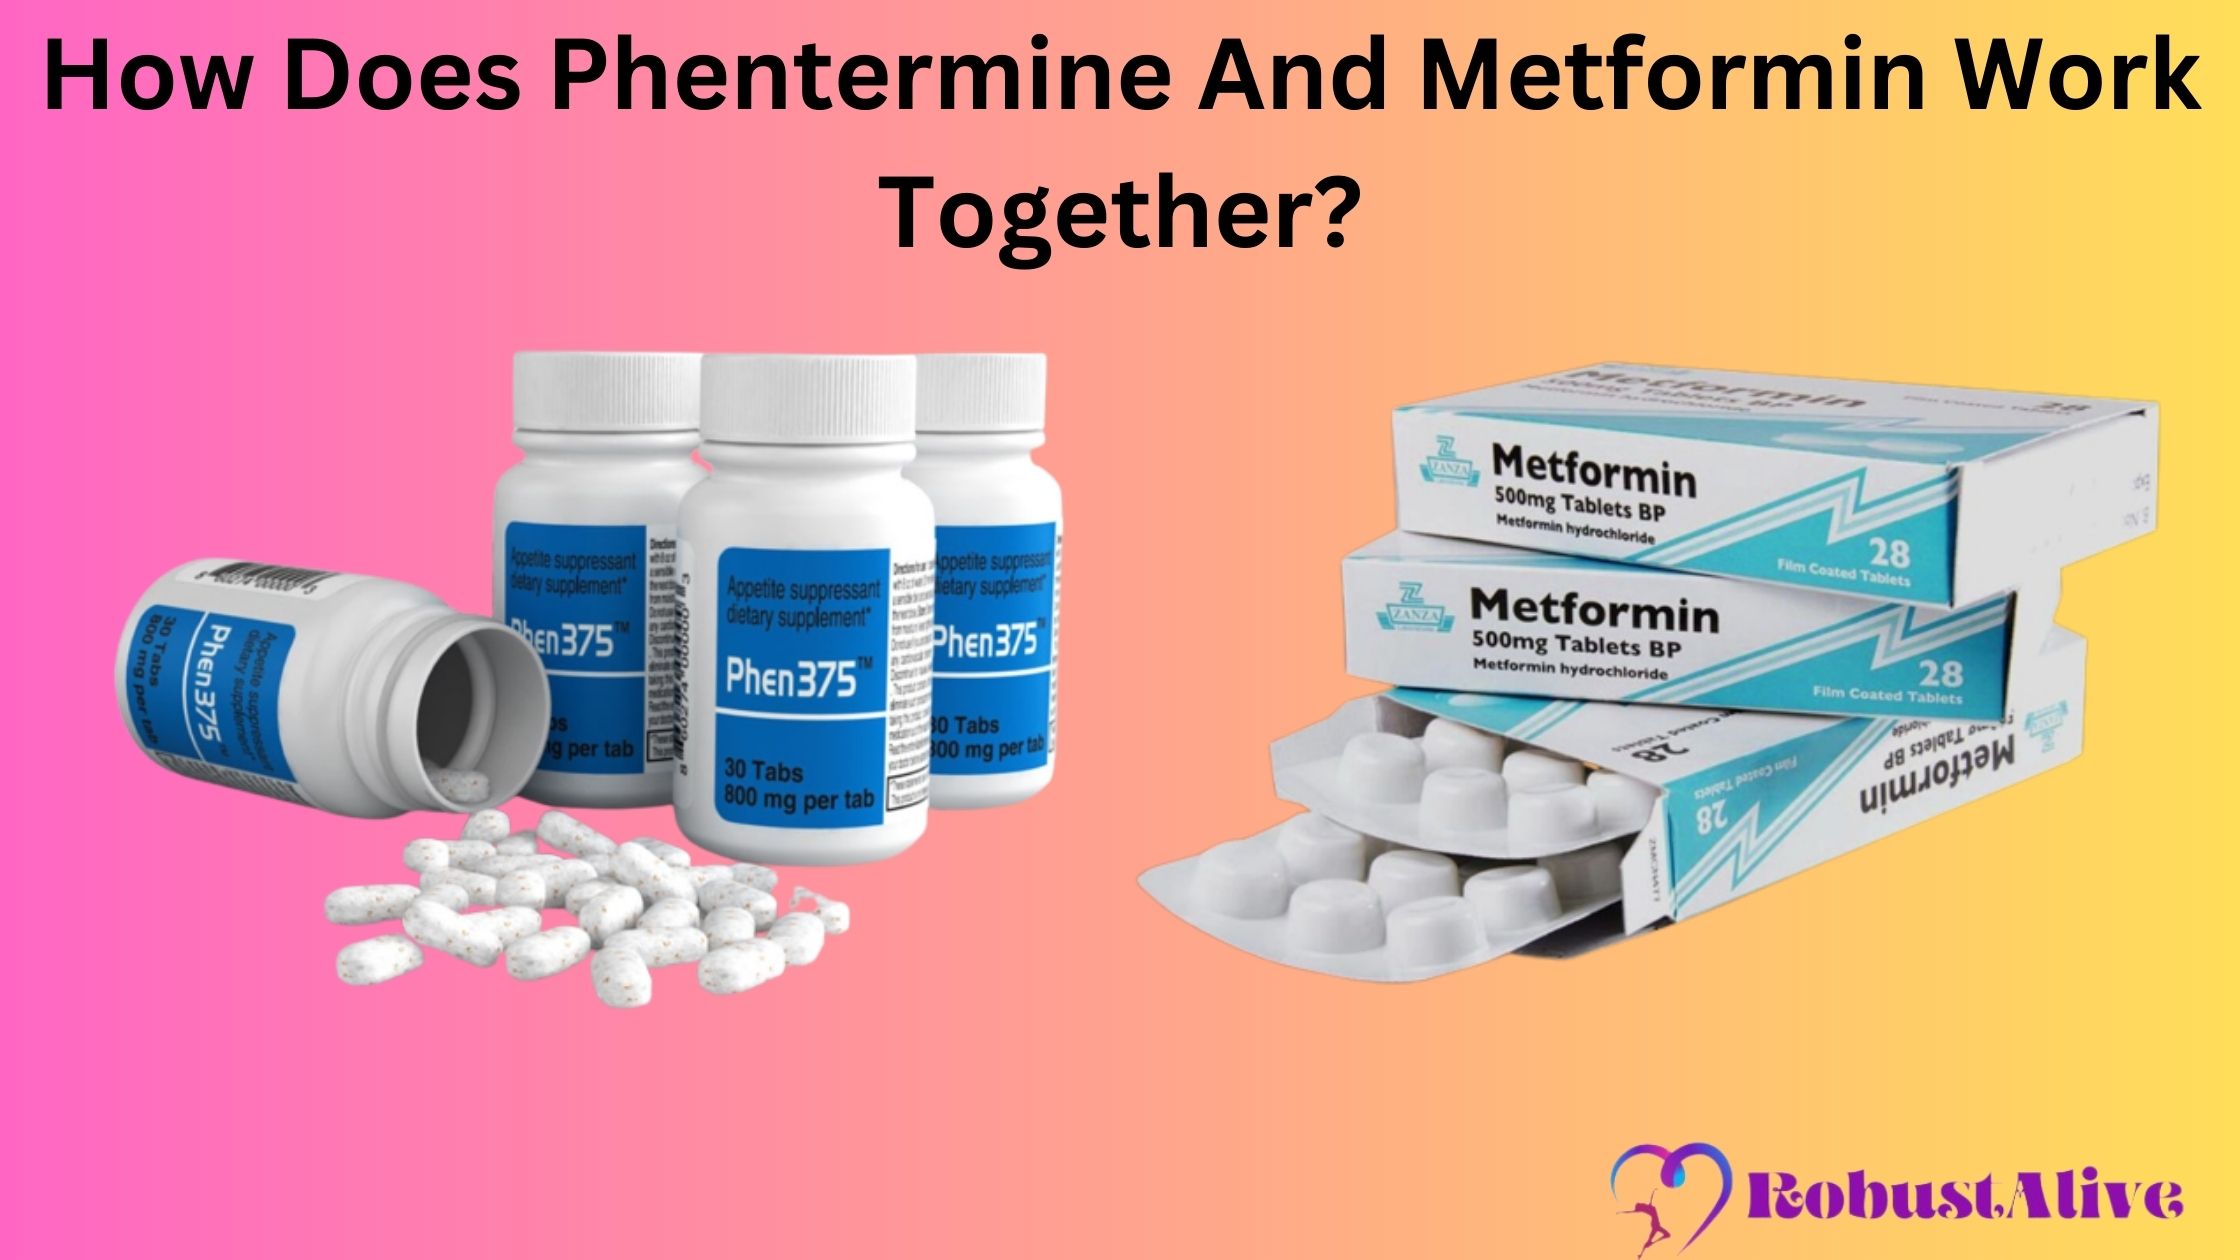 How does phentermine and metformin work together